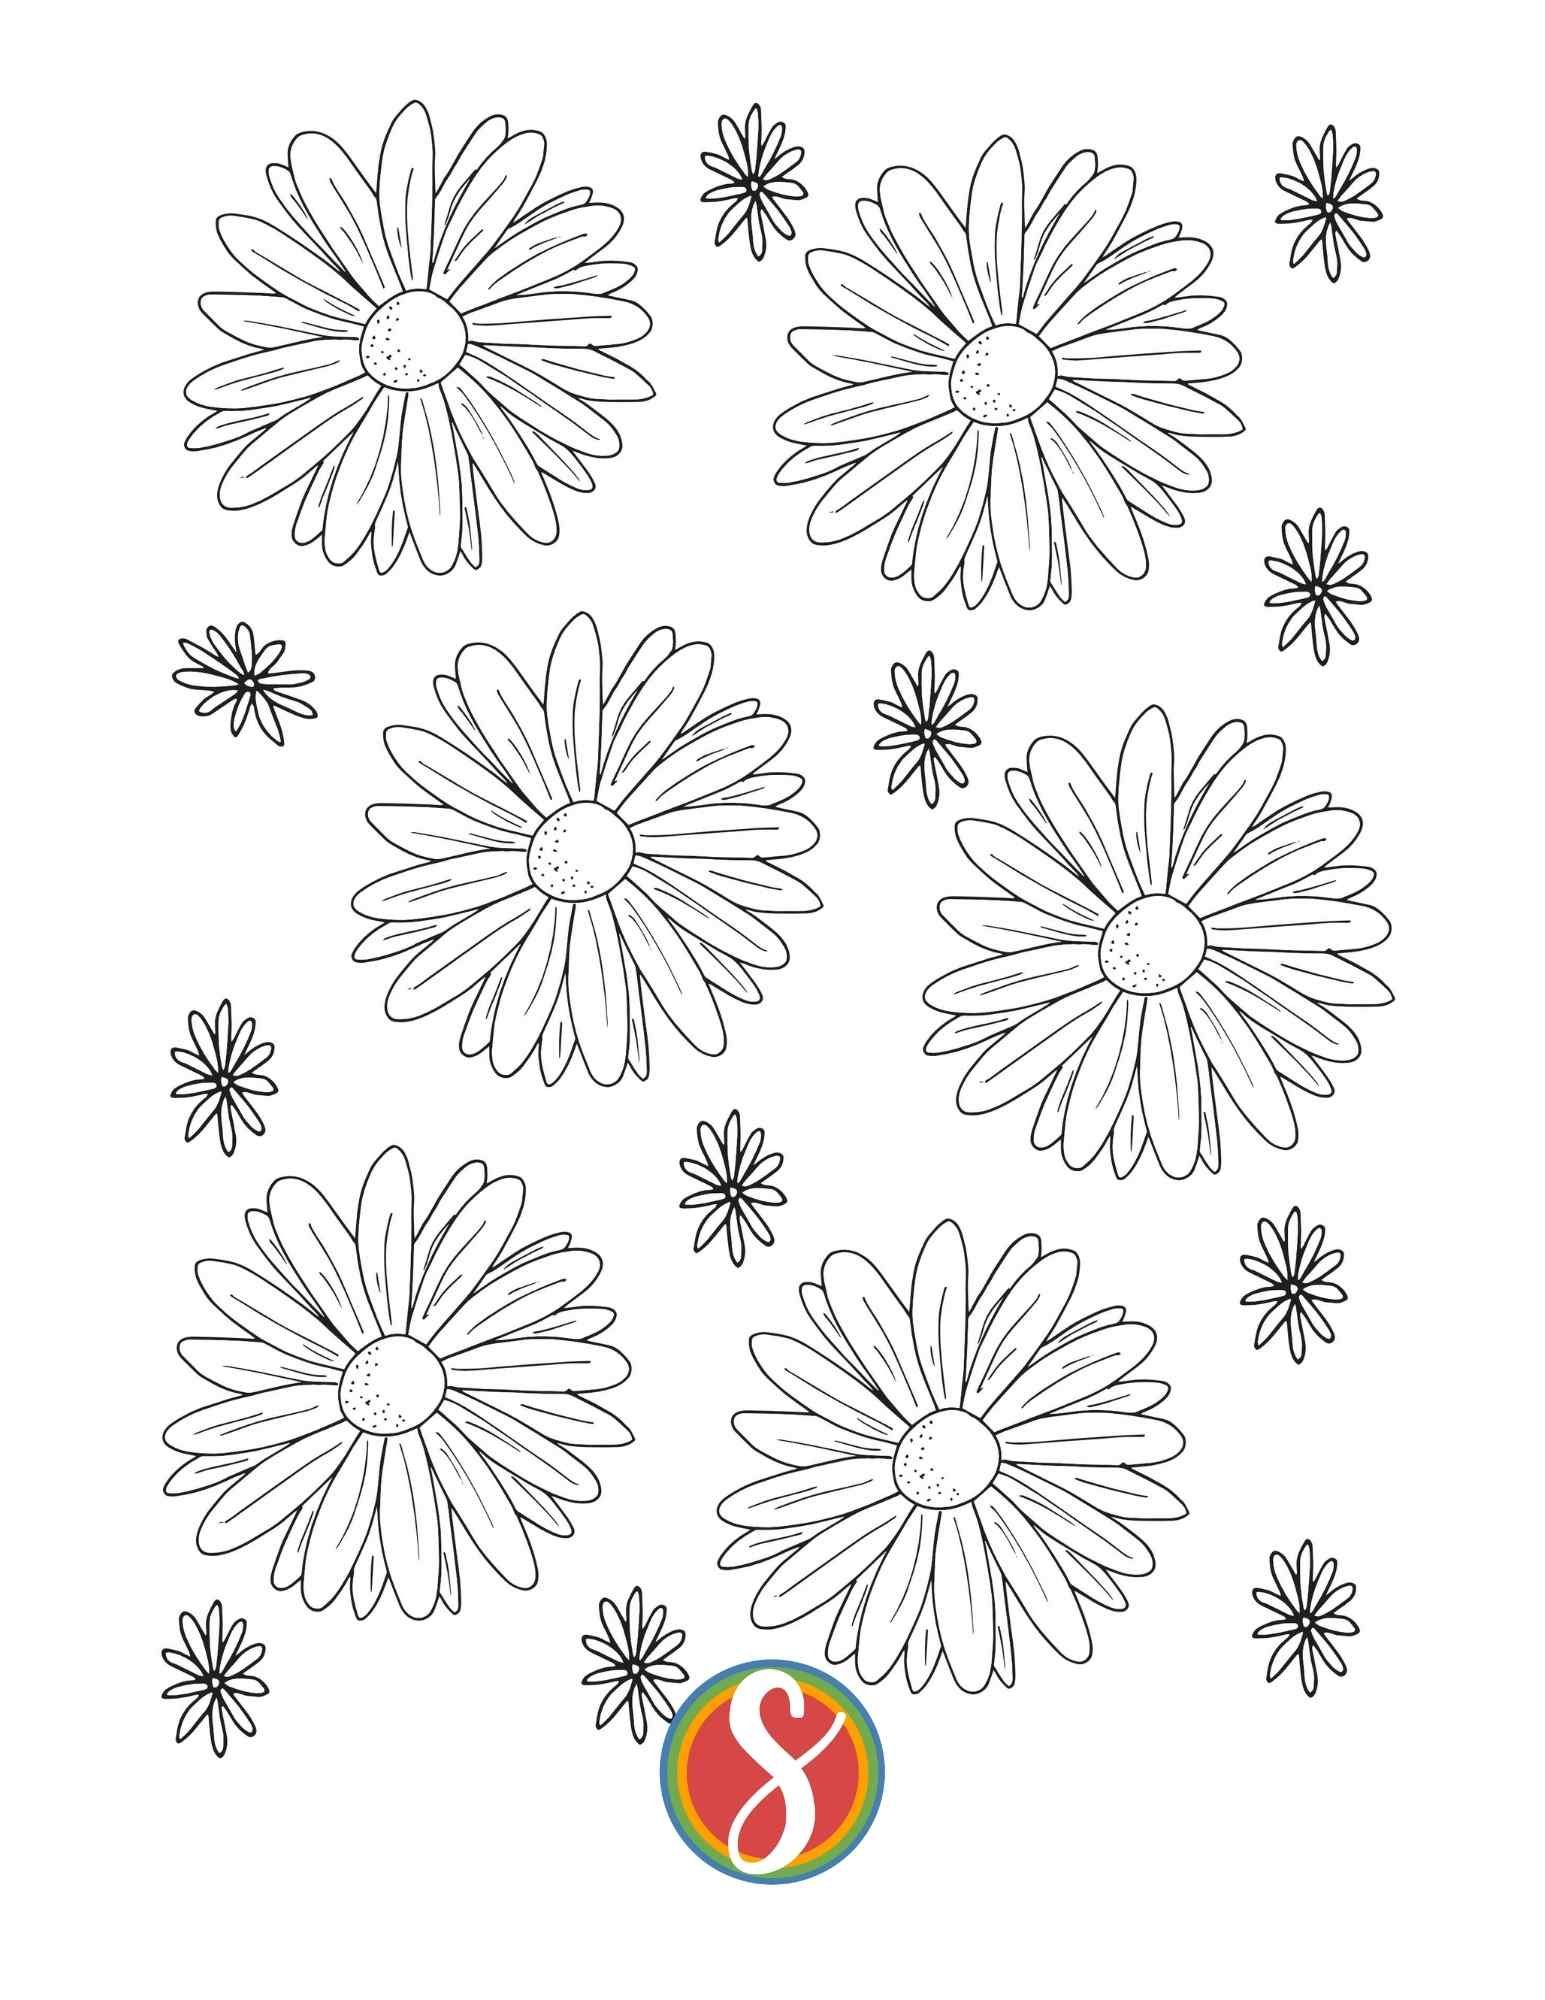 6 large daisies surrounded by more smaller daisies on a coloring page